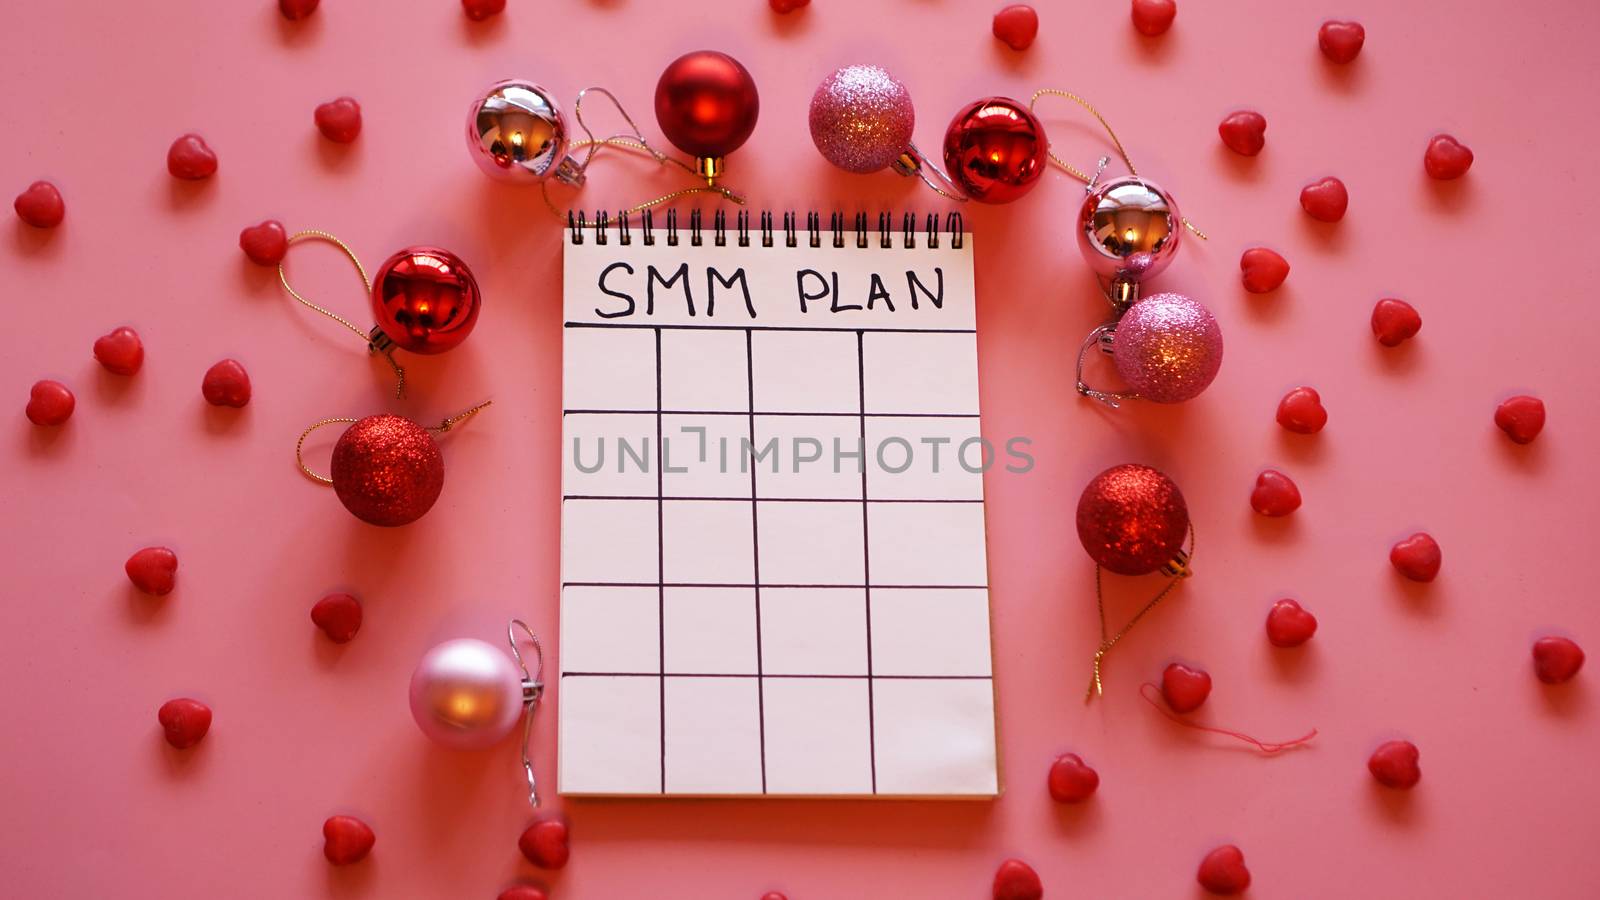 Freelance project. SMM plan blank. White sheet on a pink festive background with red Christmas balls and candy in the form of hearts